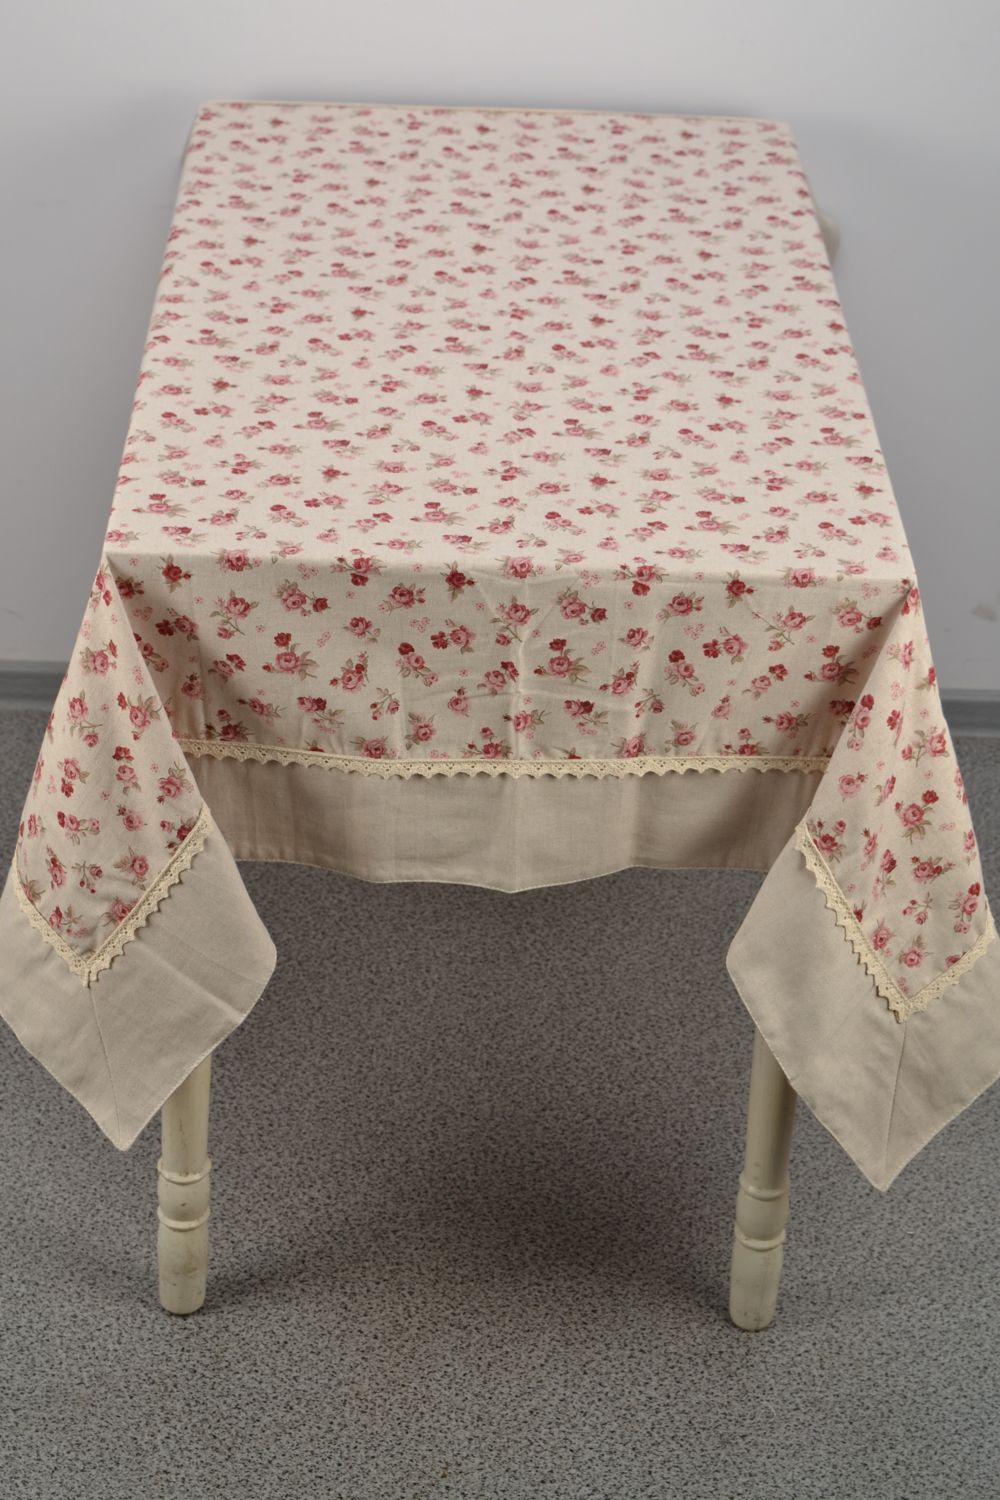 Handmade tablecloth sewn of cotton and polyamide fabric with lace photo 2